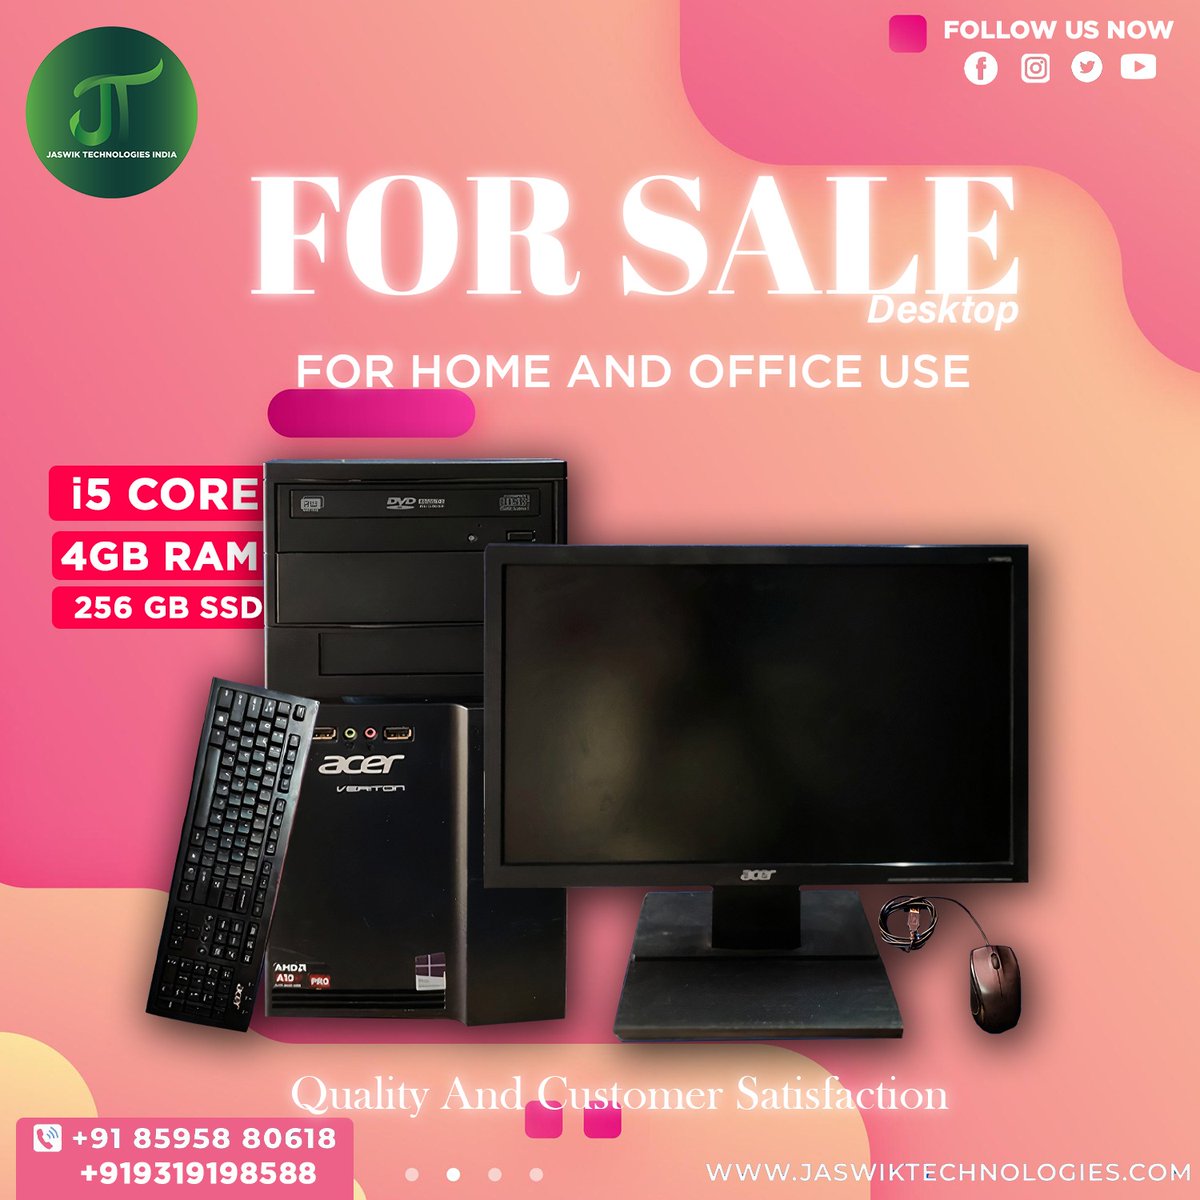 'Unleash Productivity with Precision: Elevate Your Workflow with Our i5 Computer Desktops for Sale! 💼 Experience seamless performance and efficiency at its finest.'
.
.
.
.
.
#jaswiktechnologysolutions #BumperSale #MassiveDiscounts #digitalsale #digitalmarketing #onlineshop